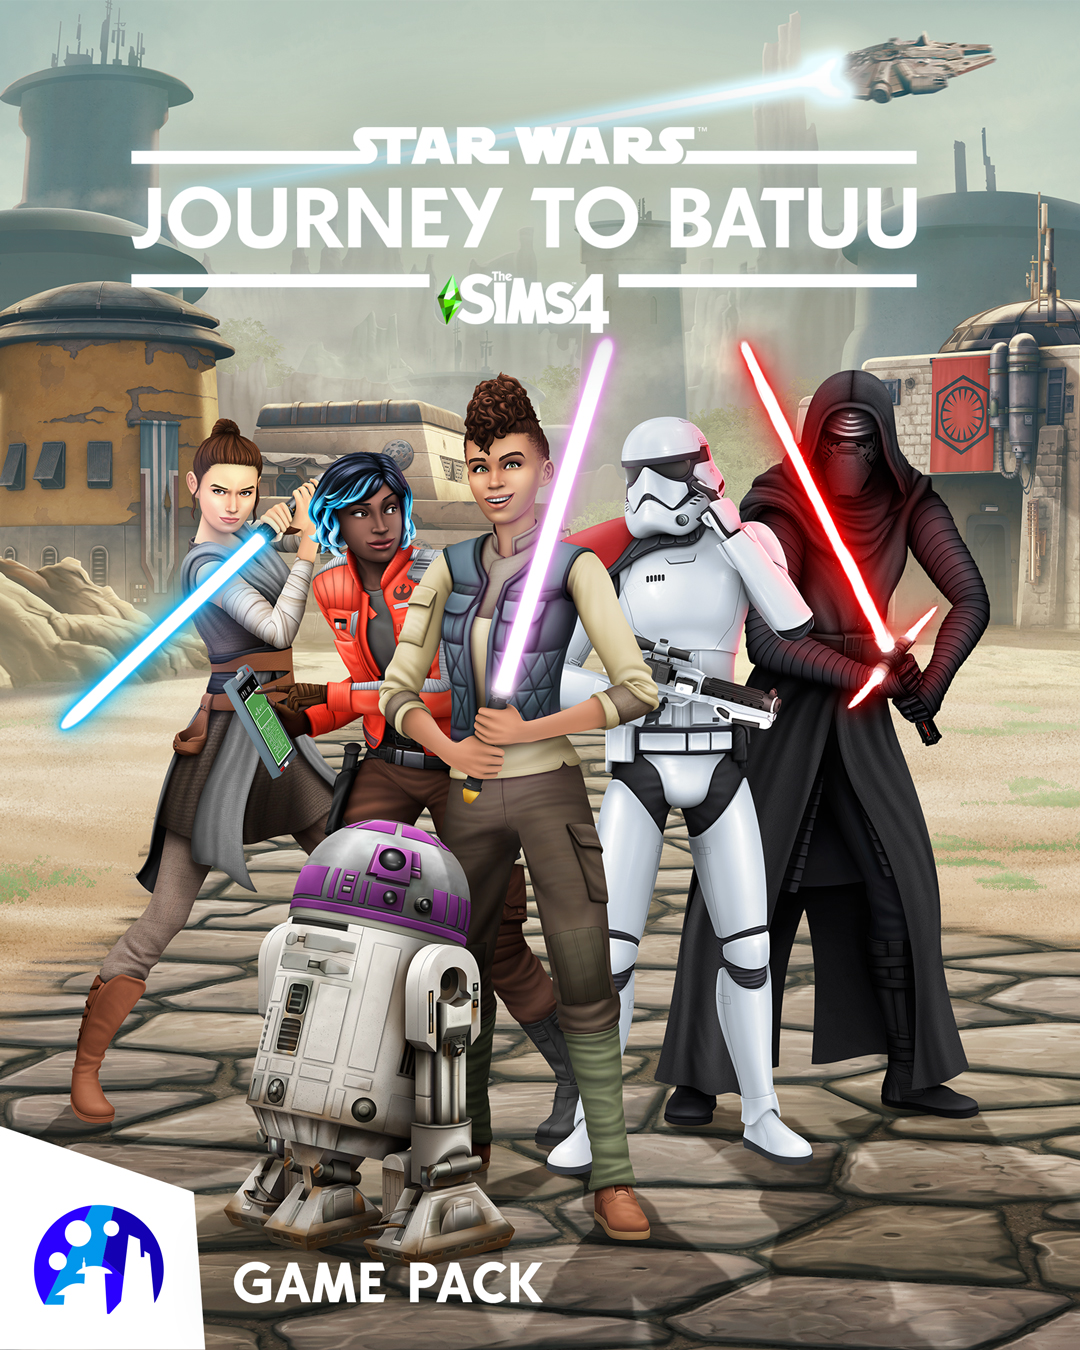 The_Sims_4_Star_Wars_Journey_to_Batuu_Cover.jpg